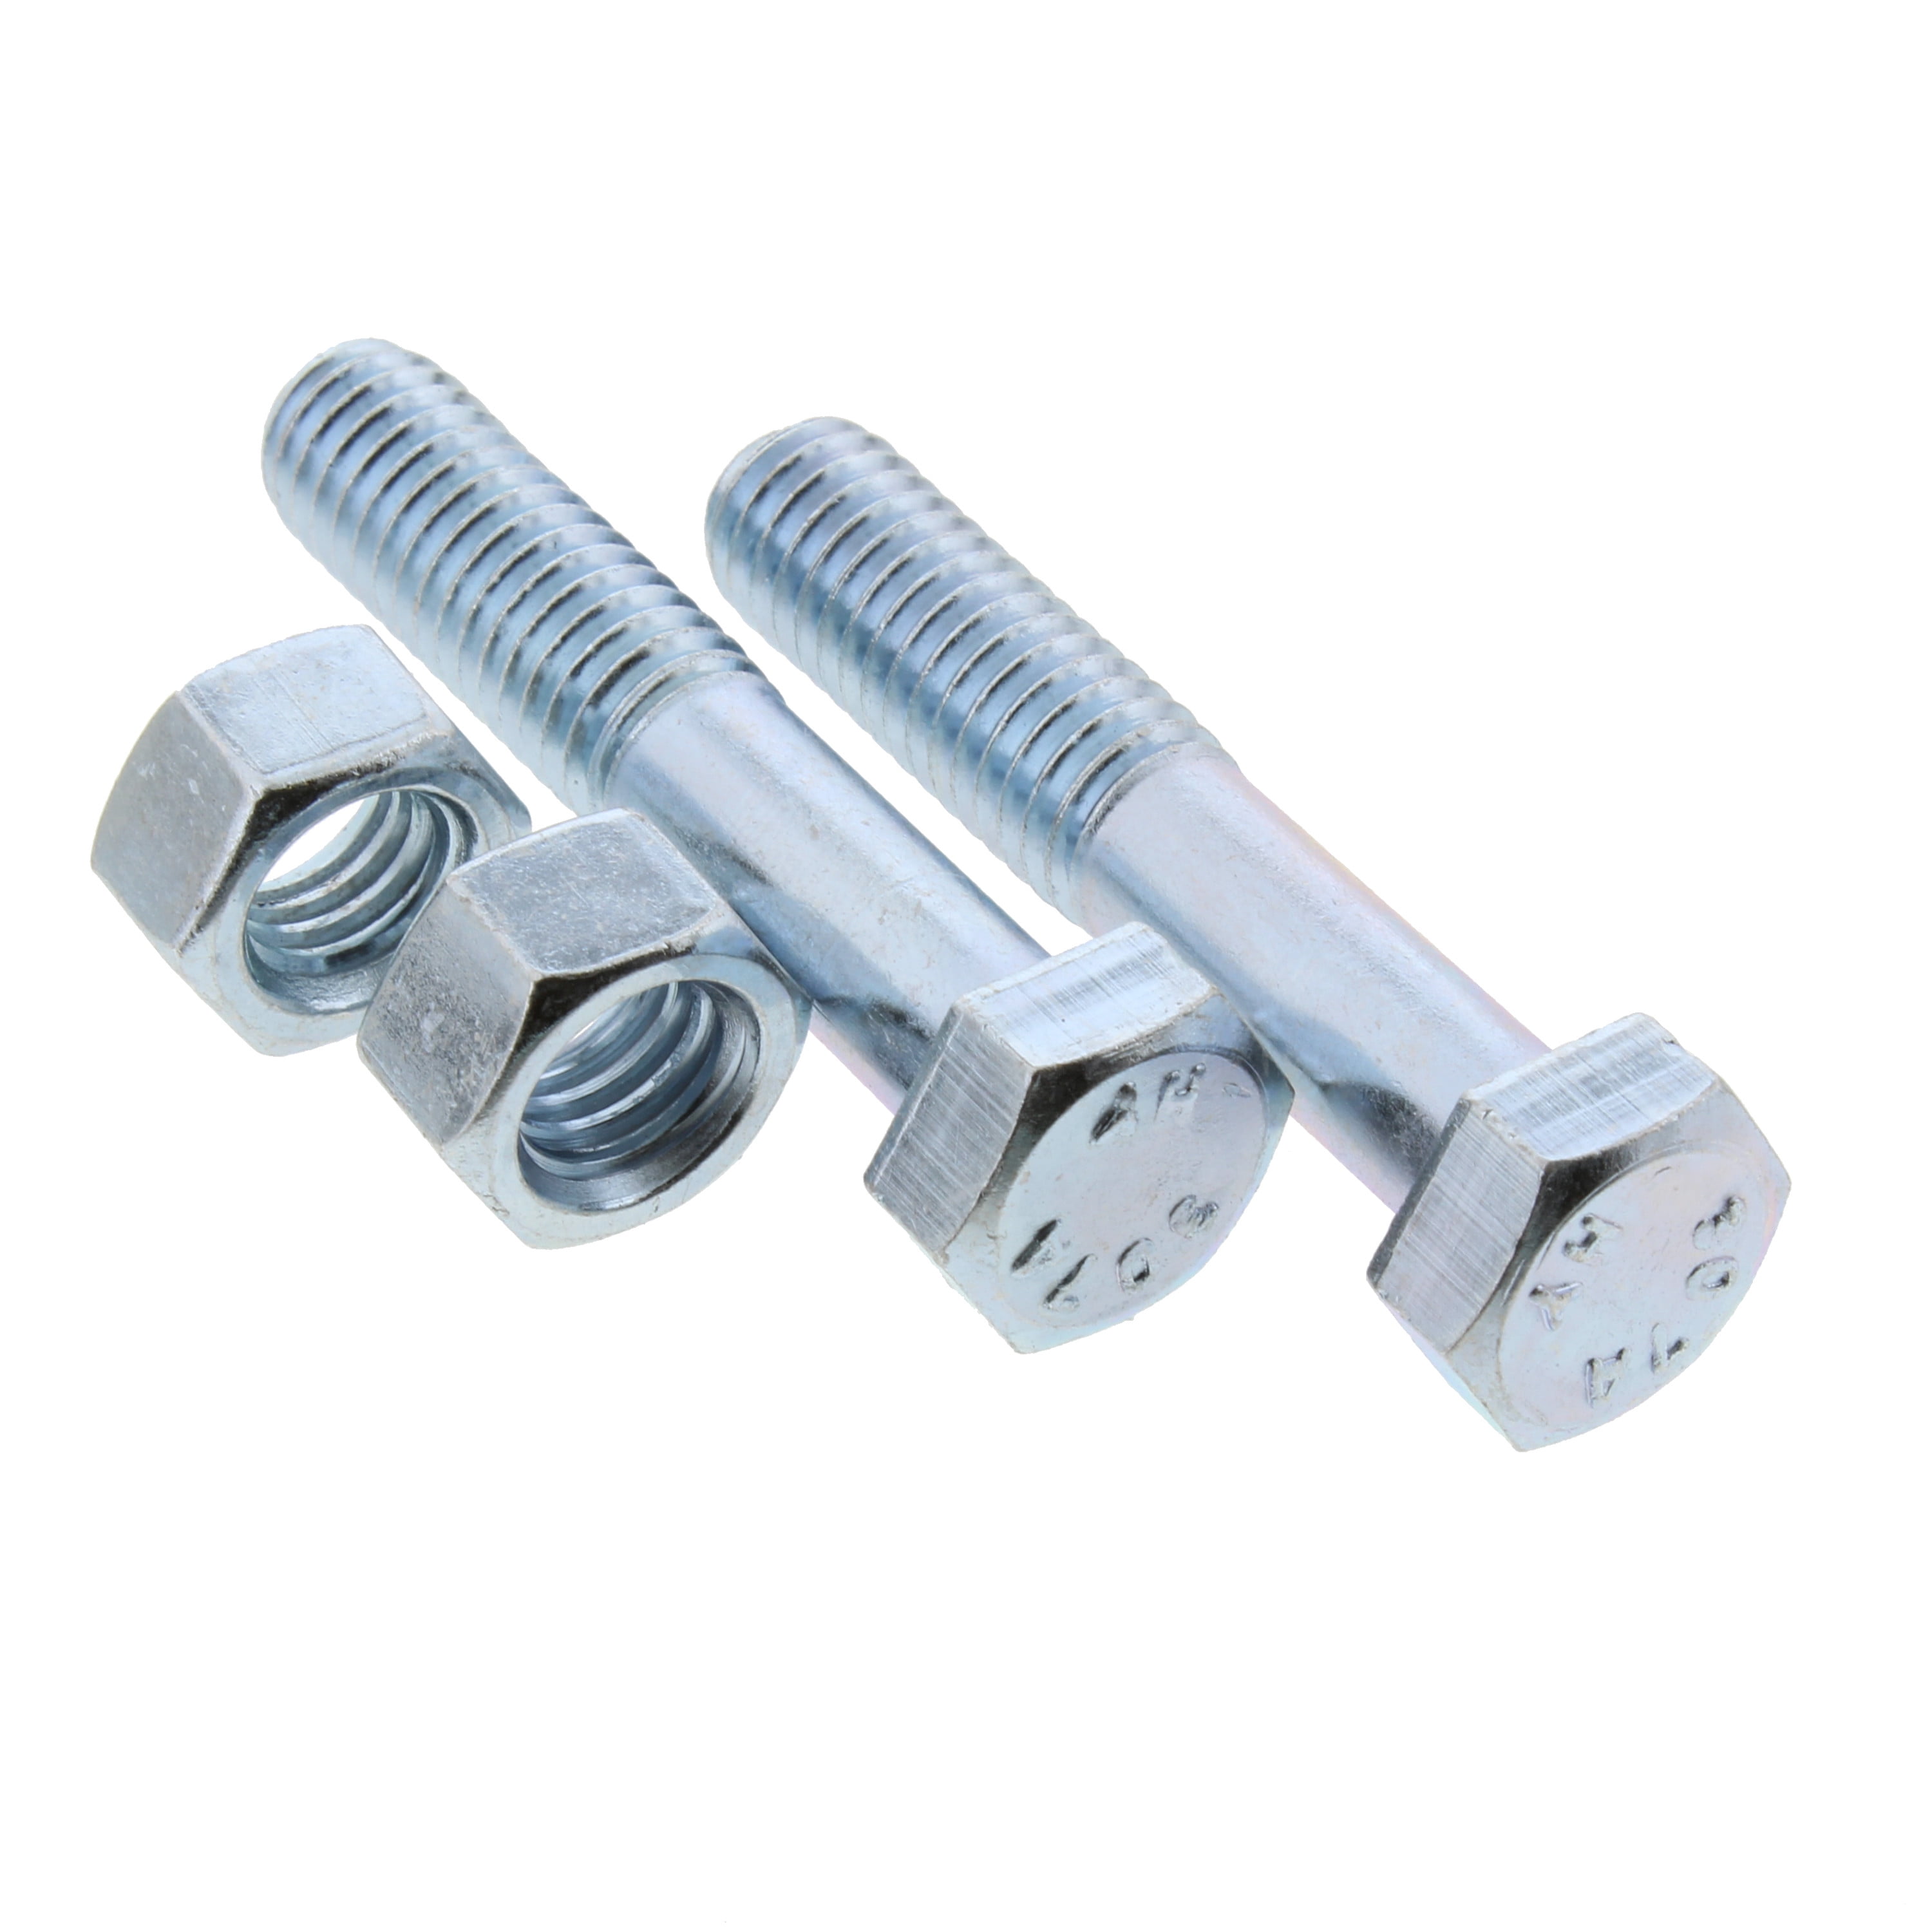 Thread Size 3/8-16 316 Stainless Steel Socket Head Screw Super-Corrosion-Resistant